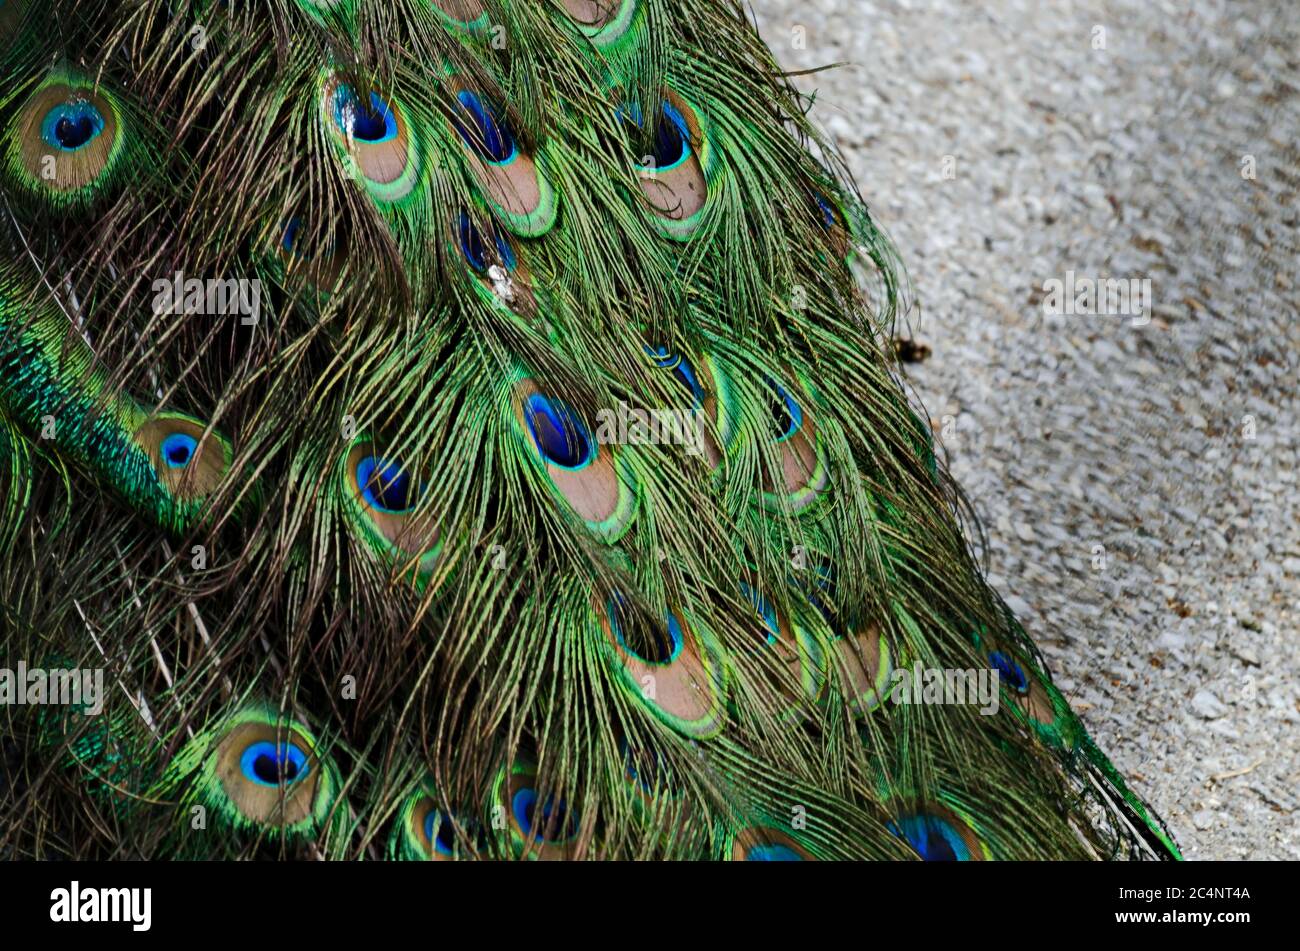 Colored plumage of male Indian peacock feathers, suitable for background, Sofia, Bulgaria Stock Photo